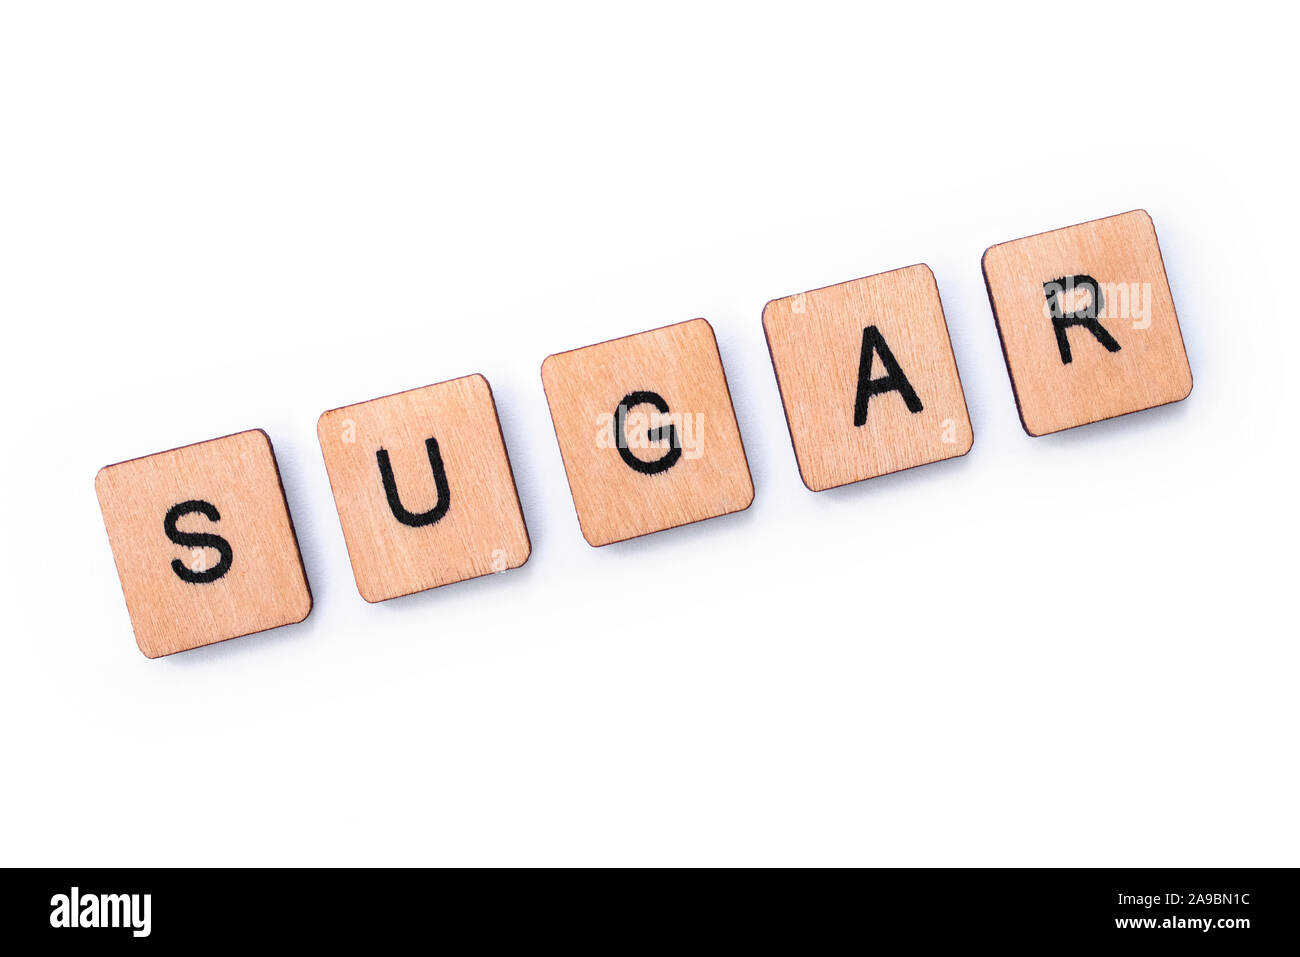 The word SUGAR, spelt with wooden letter tiles over a white background. Stock Photo